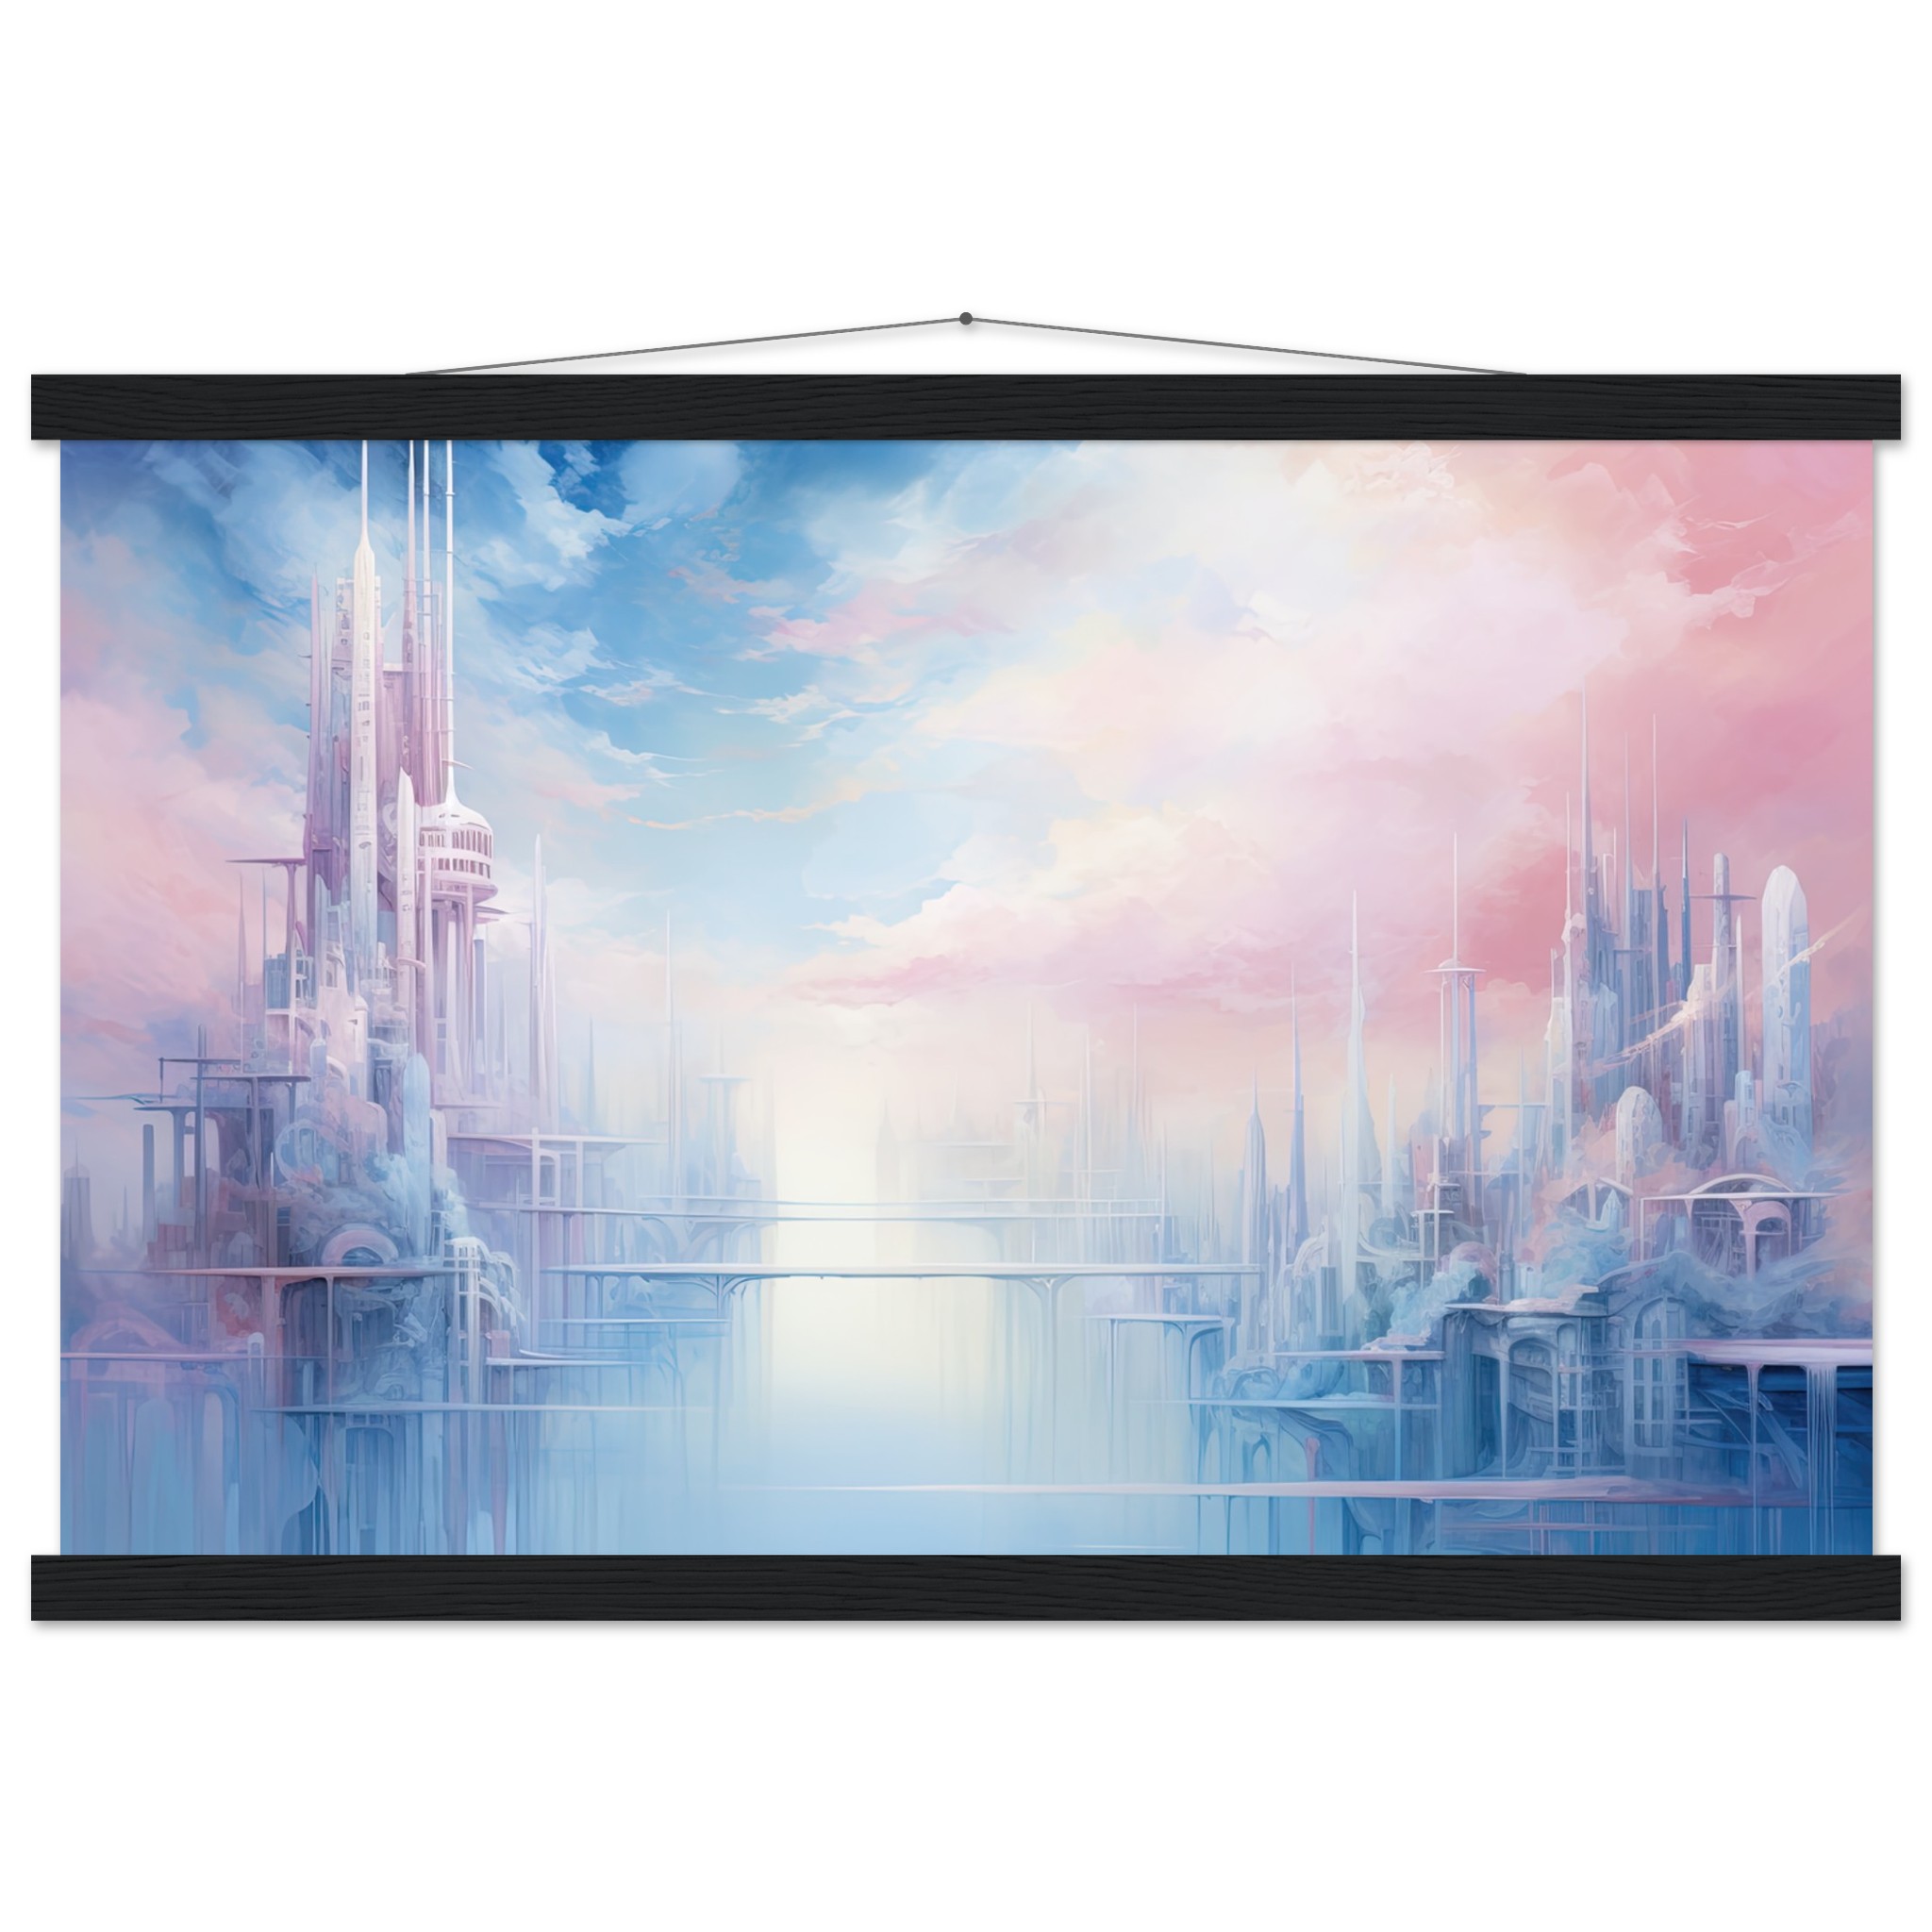 Pastel City in the Clouds Hanging Print – 40×60 cm / 16×24″, Black wall hanger